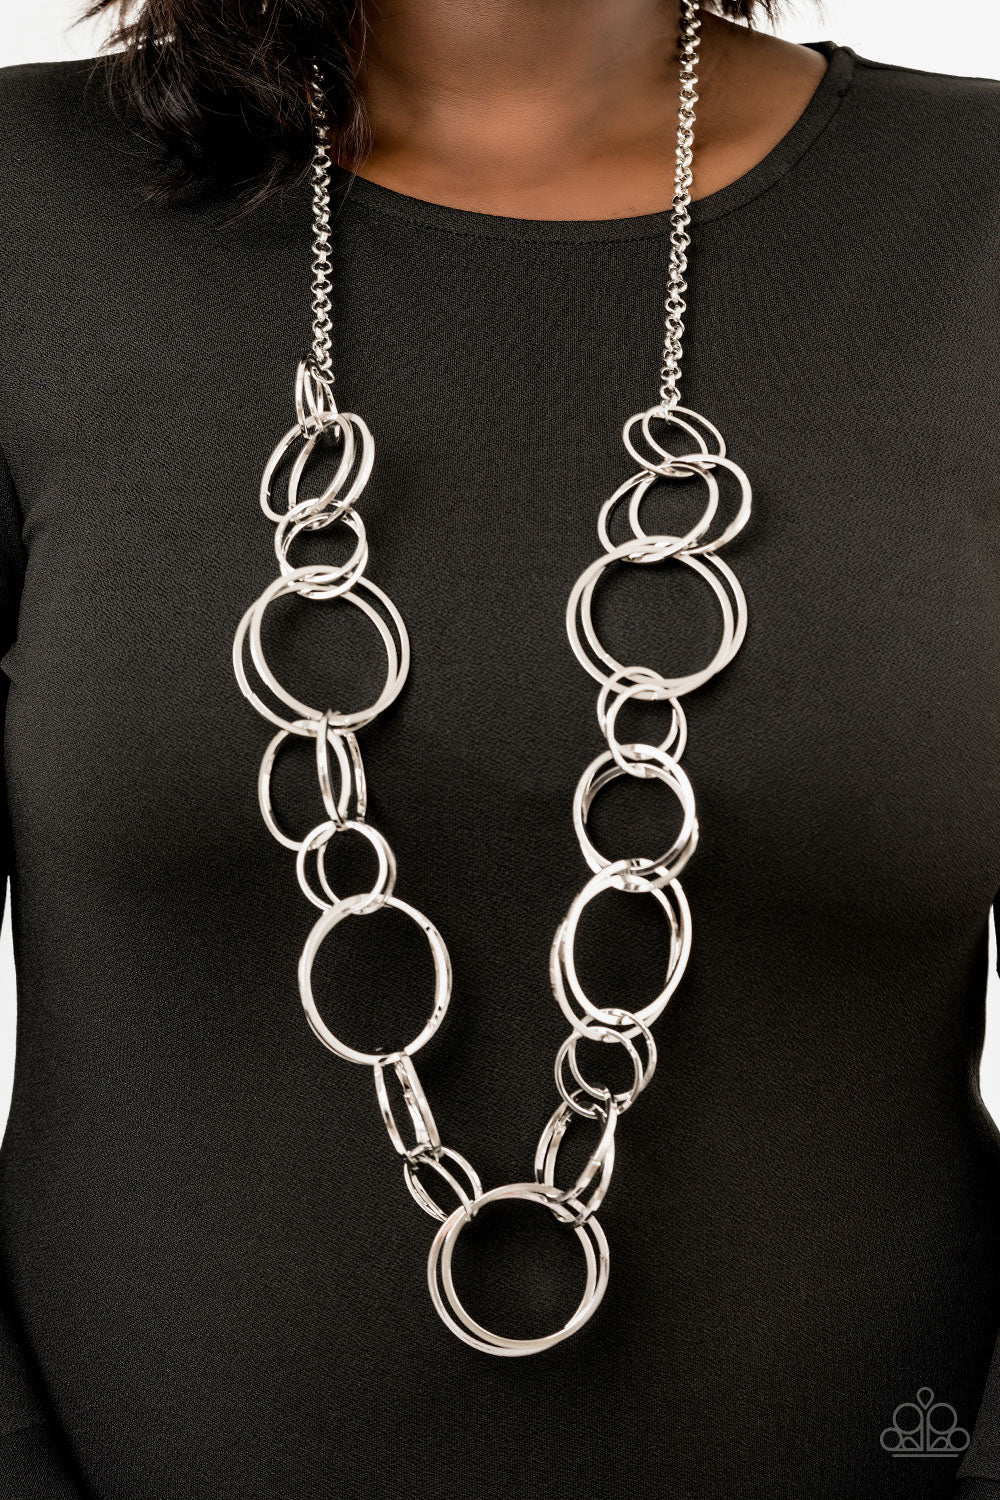 Paparazzi Natural-Born RINGLEADER - Silver Hoops Necklace - 2019 Convention Exclusive - $5 Jewelry With Ashley Swint